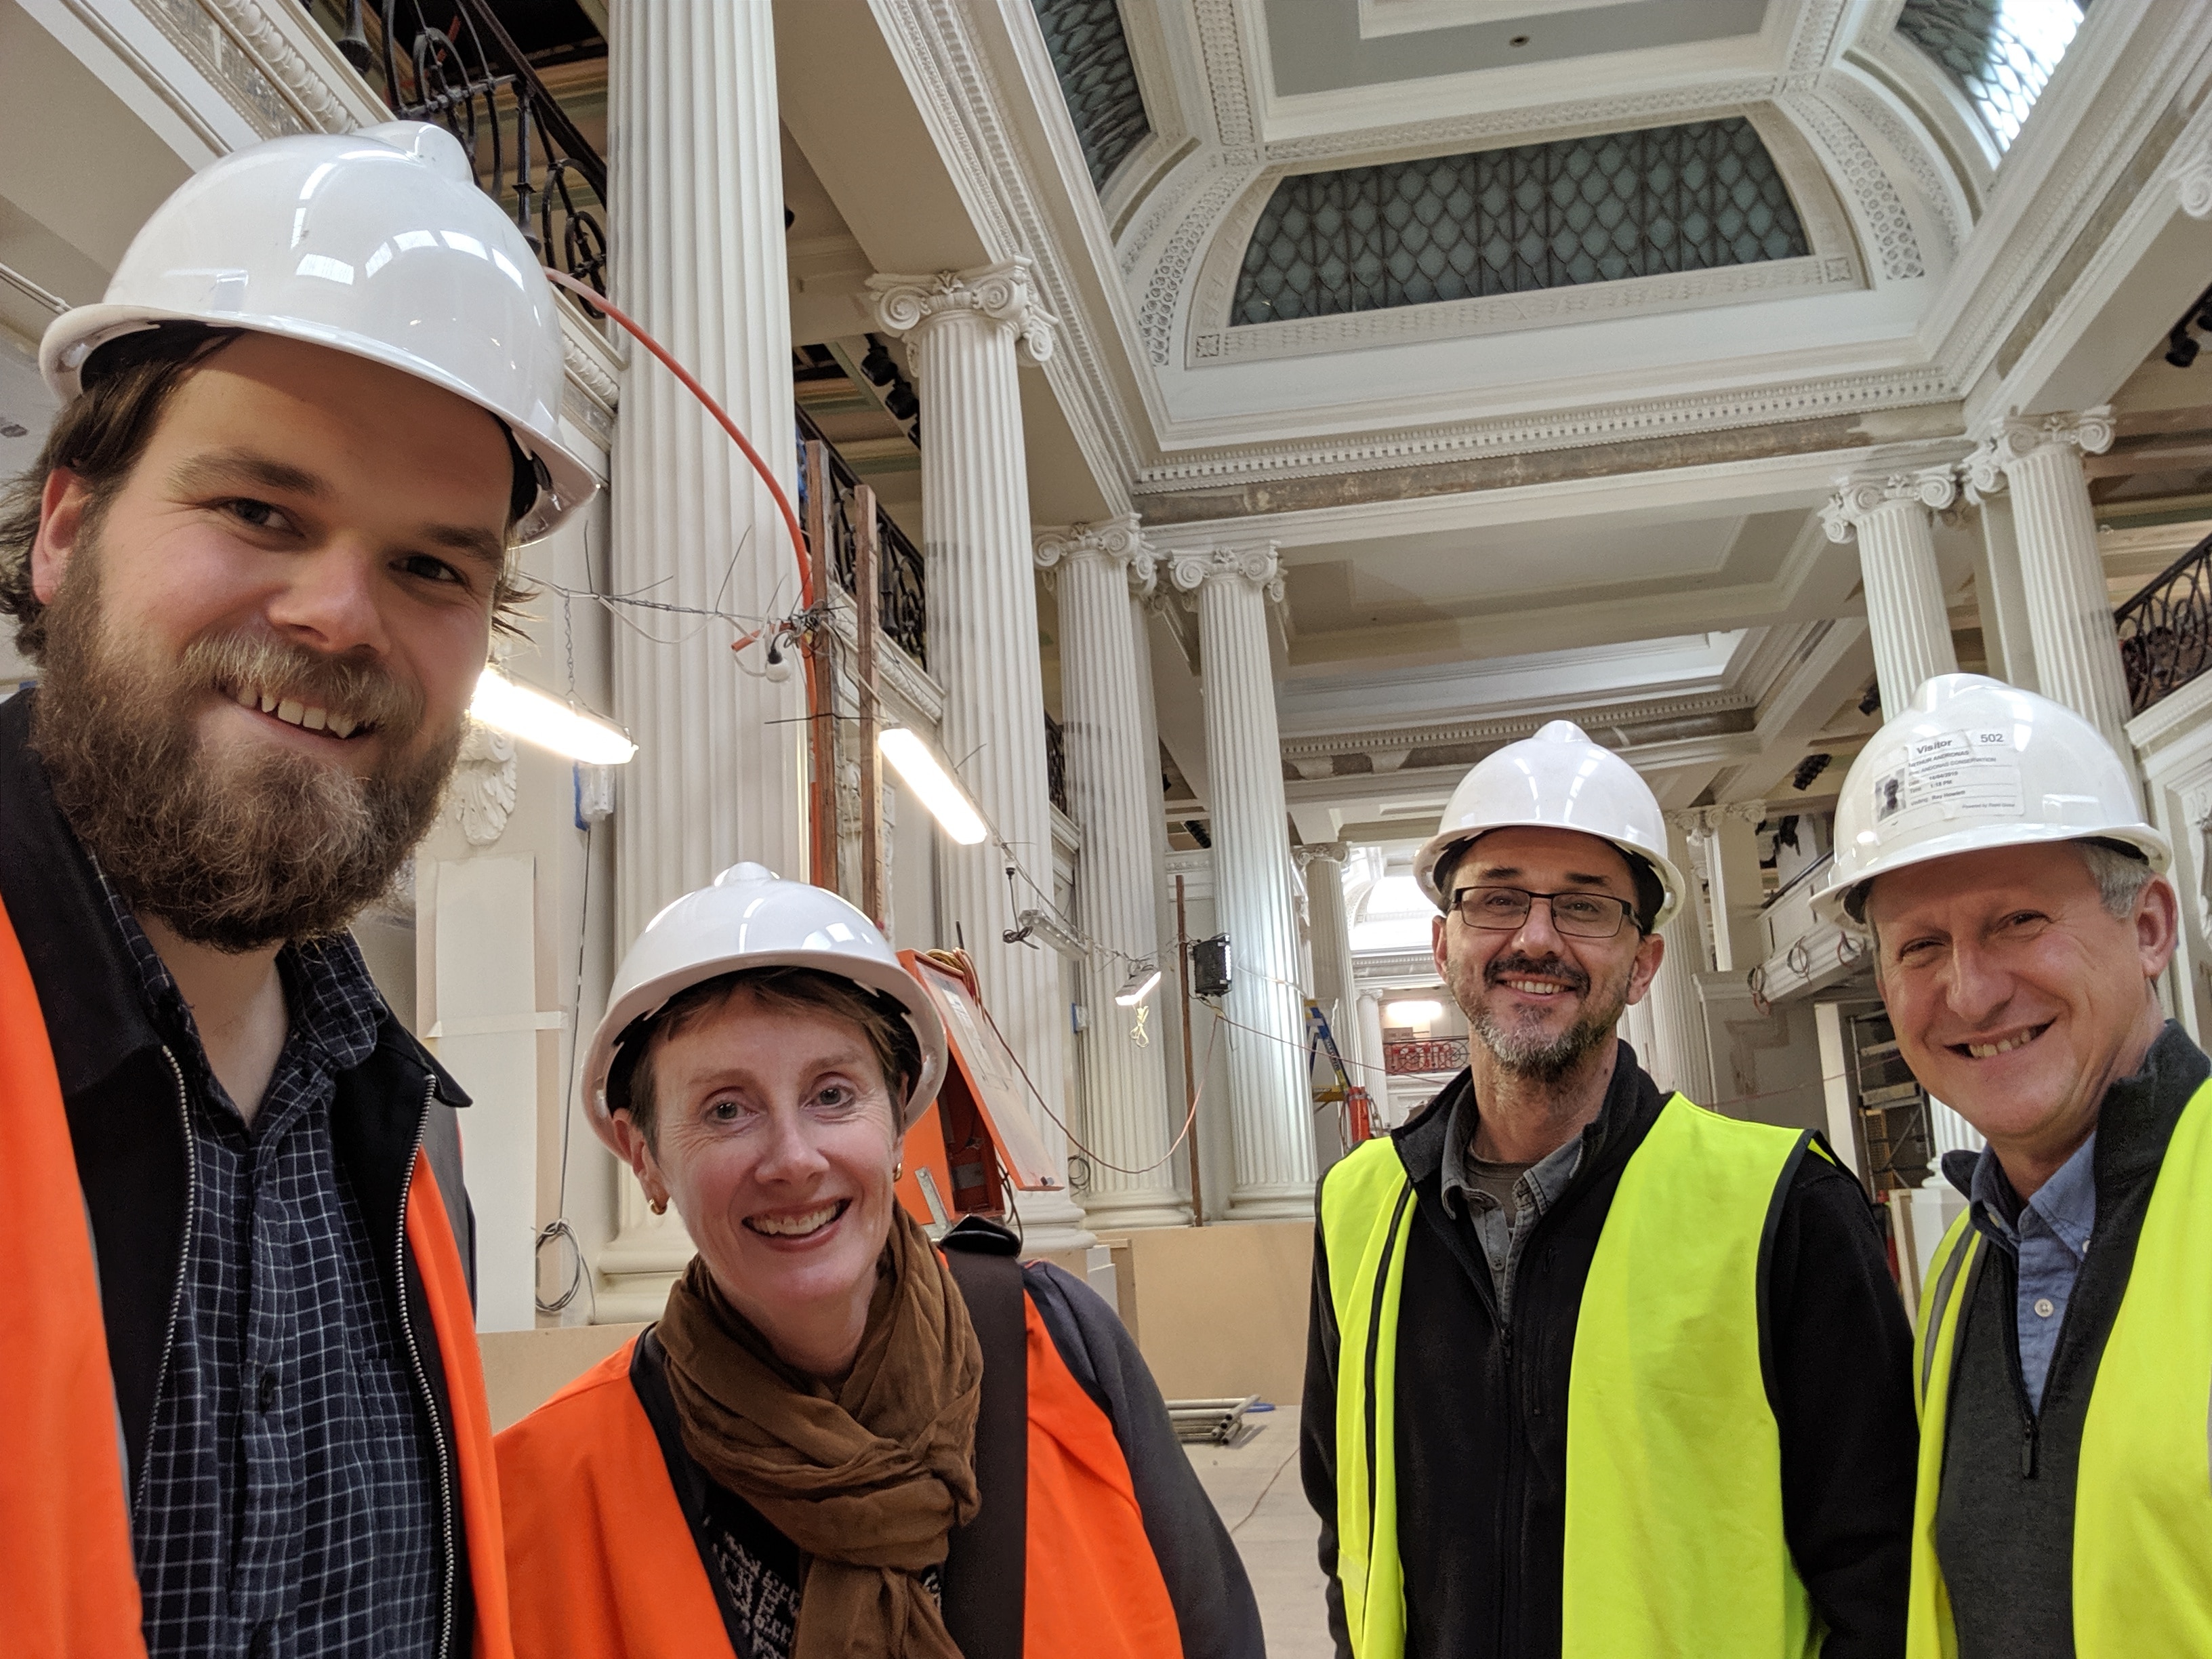 Arthur Andronas (R) with colleagues inside the State Library of Victoria during restoration works 